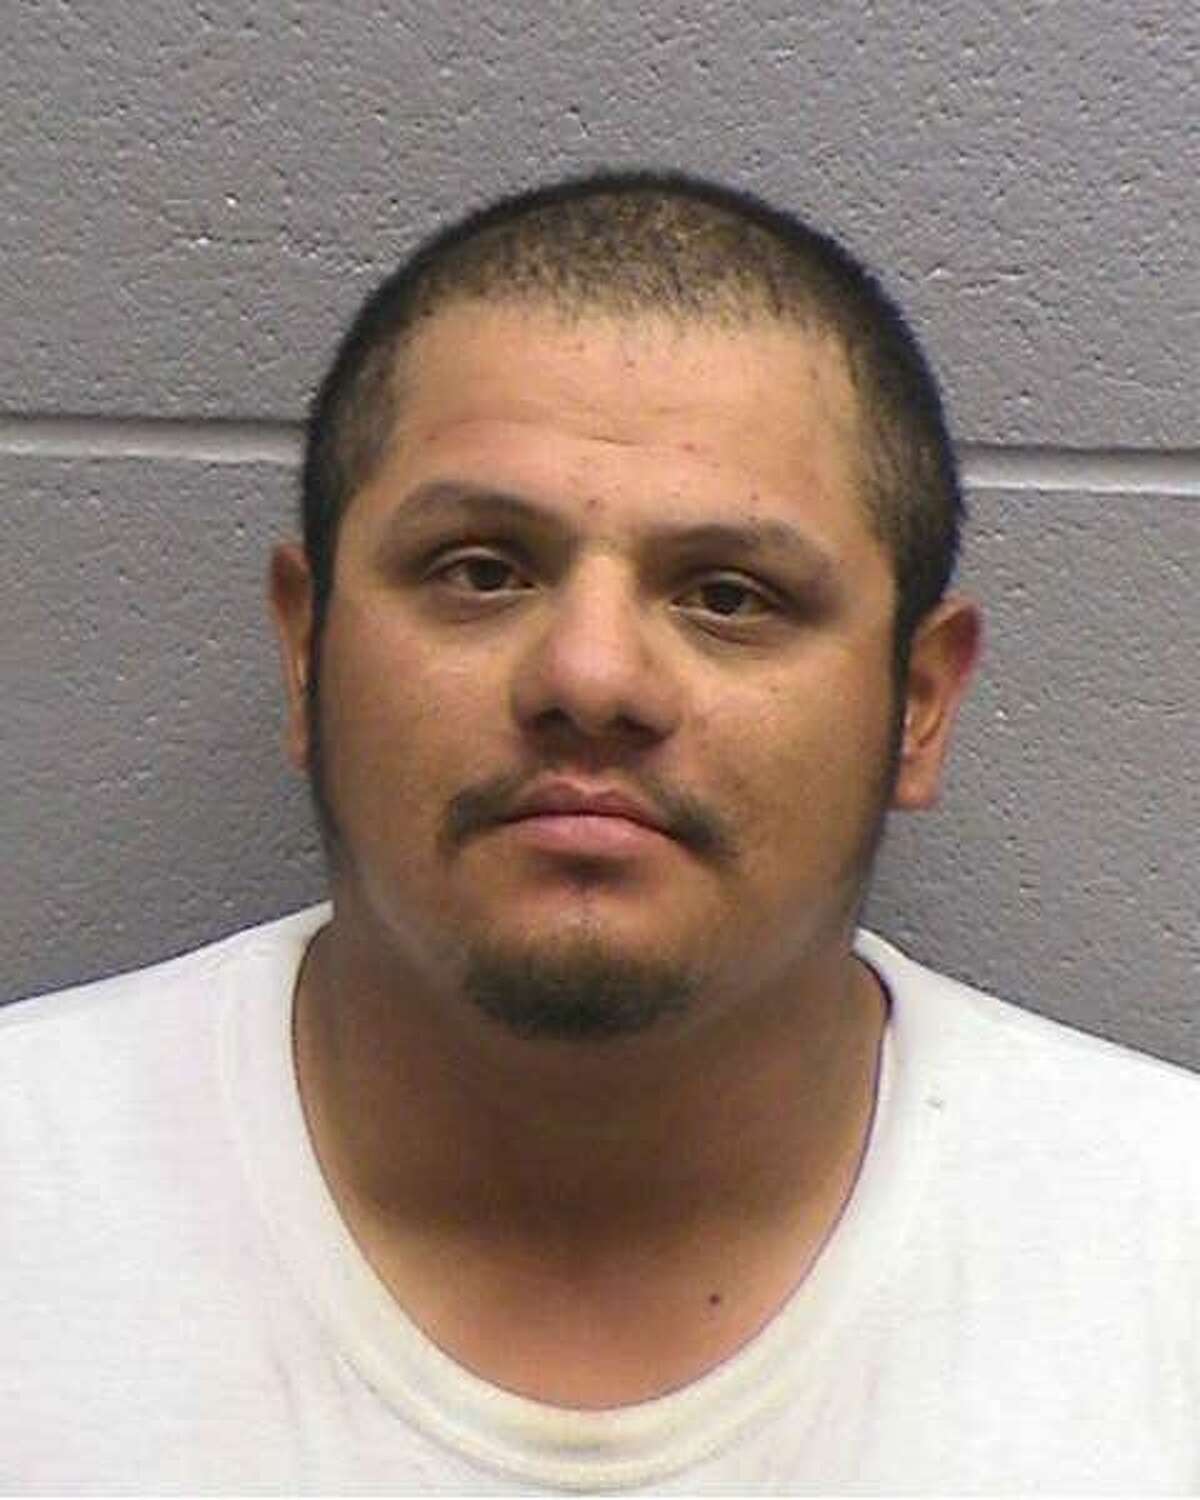 Alfonzo Alonzo Rodriguez, 25, is being held on a $175,000 bond on a first-degree murder charge.